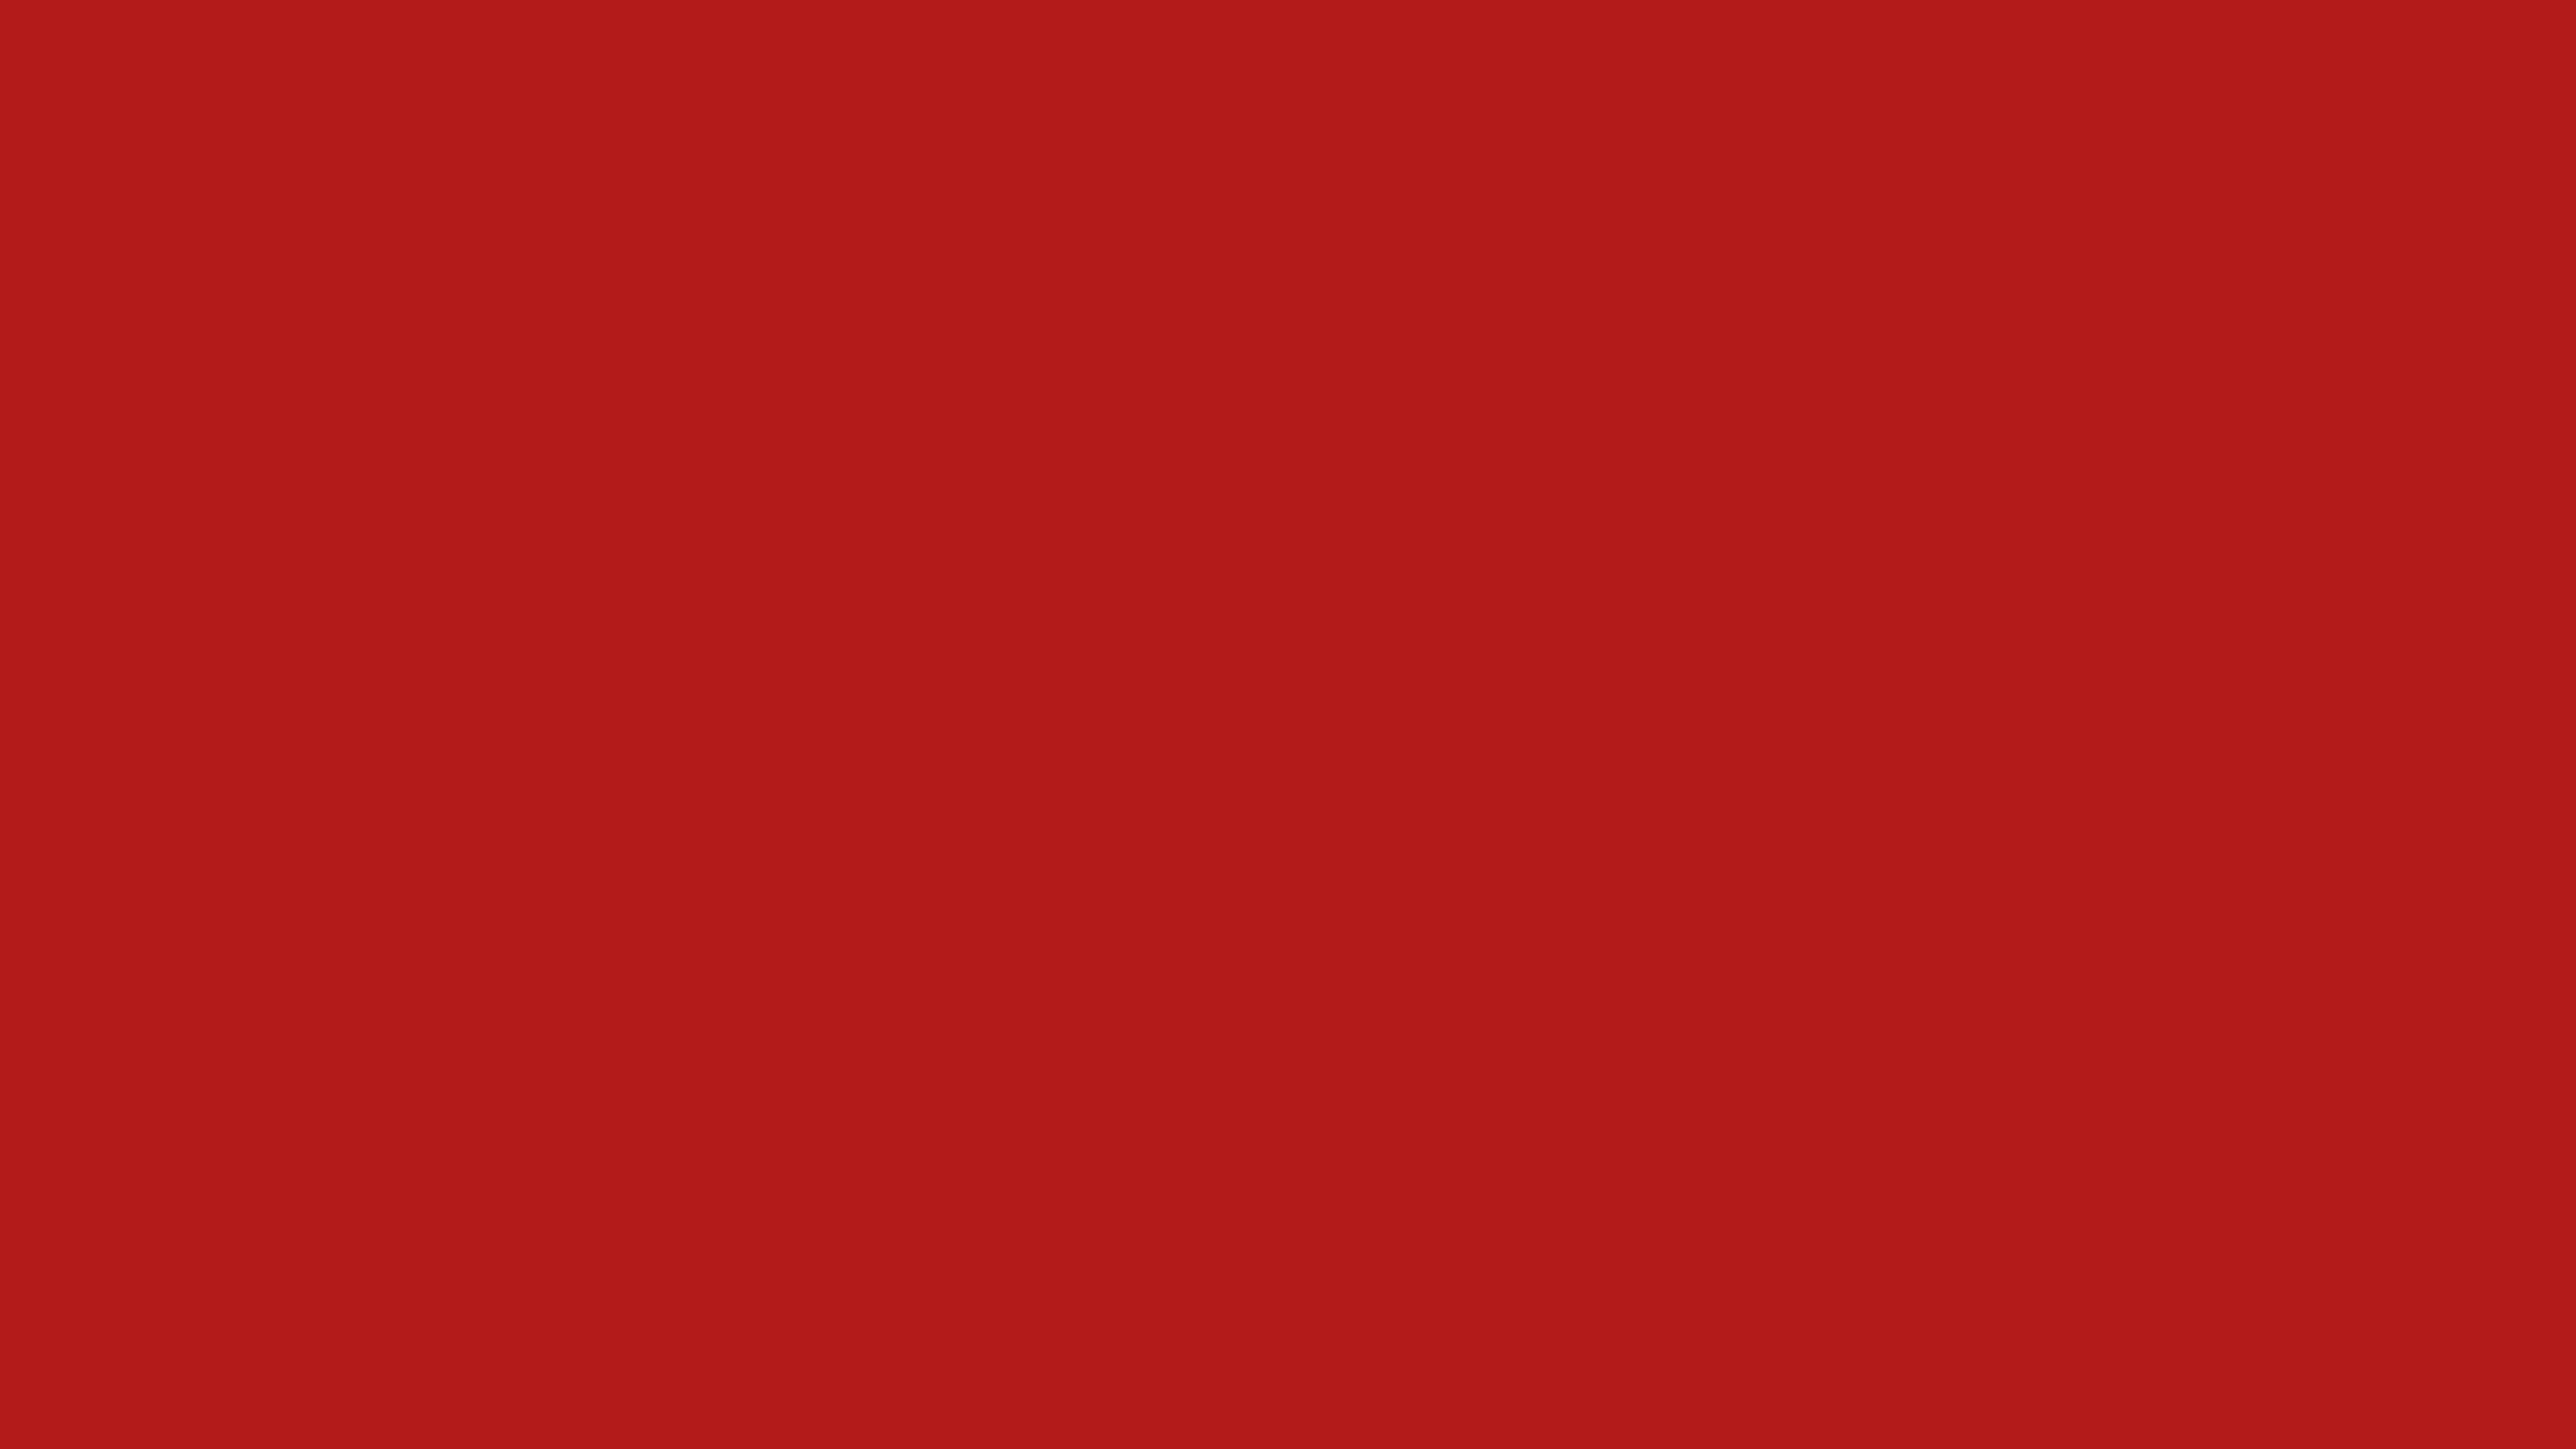 5120x2880 Cornell Red Solid Color Background